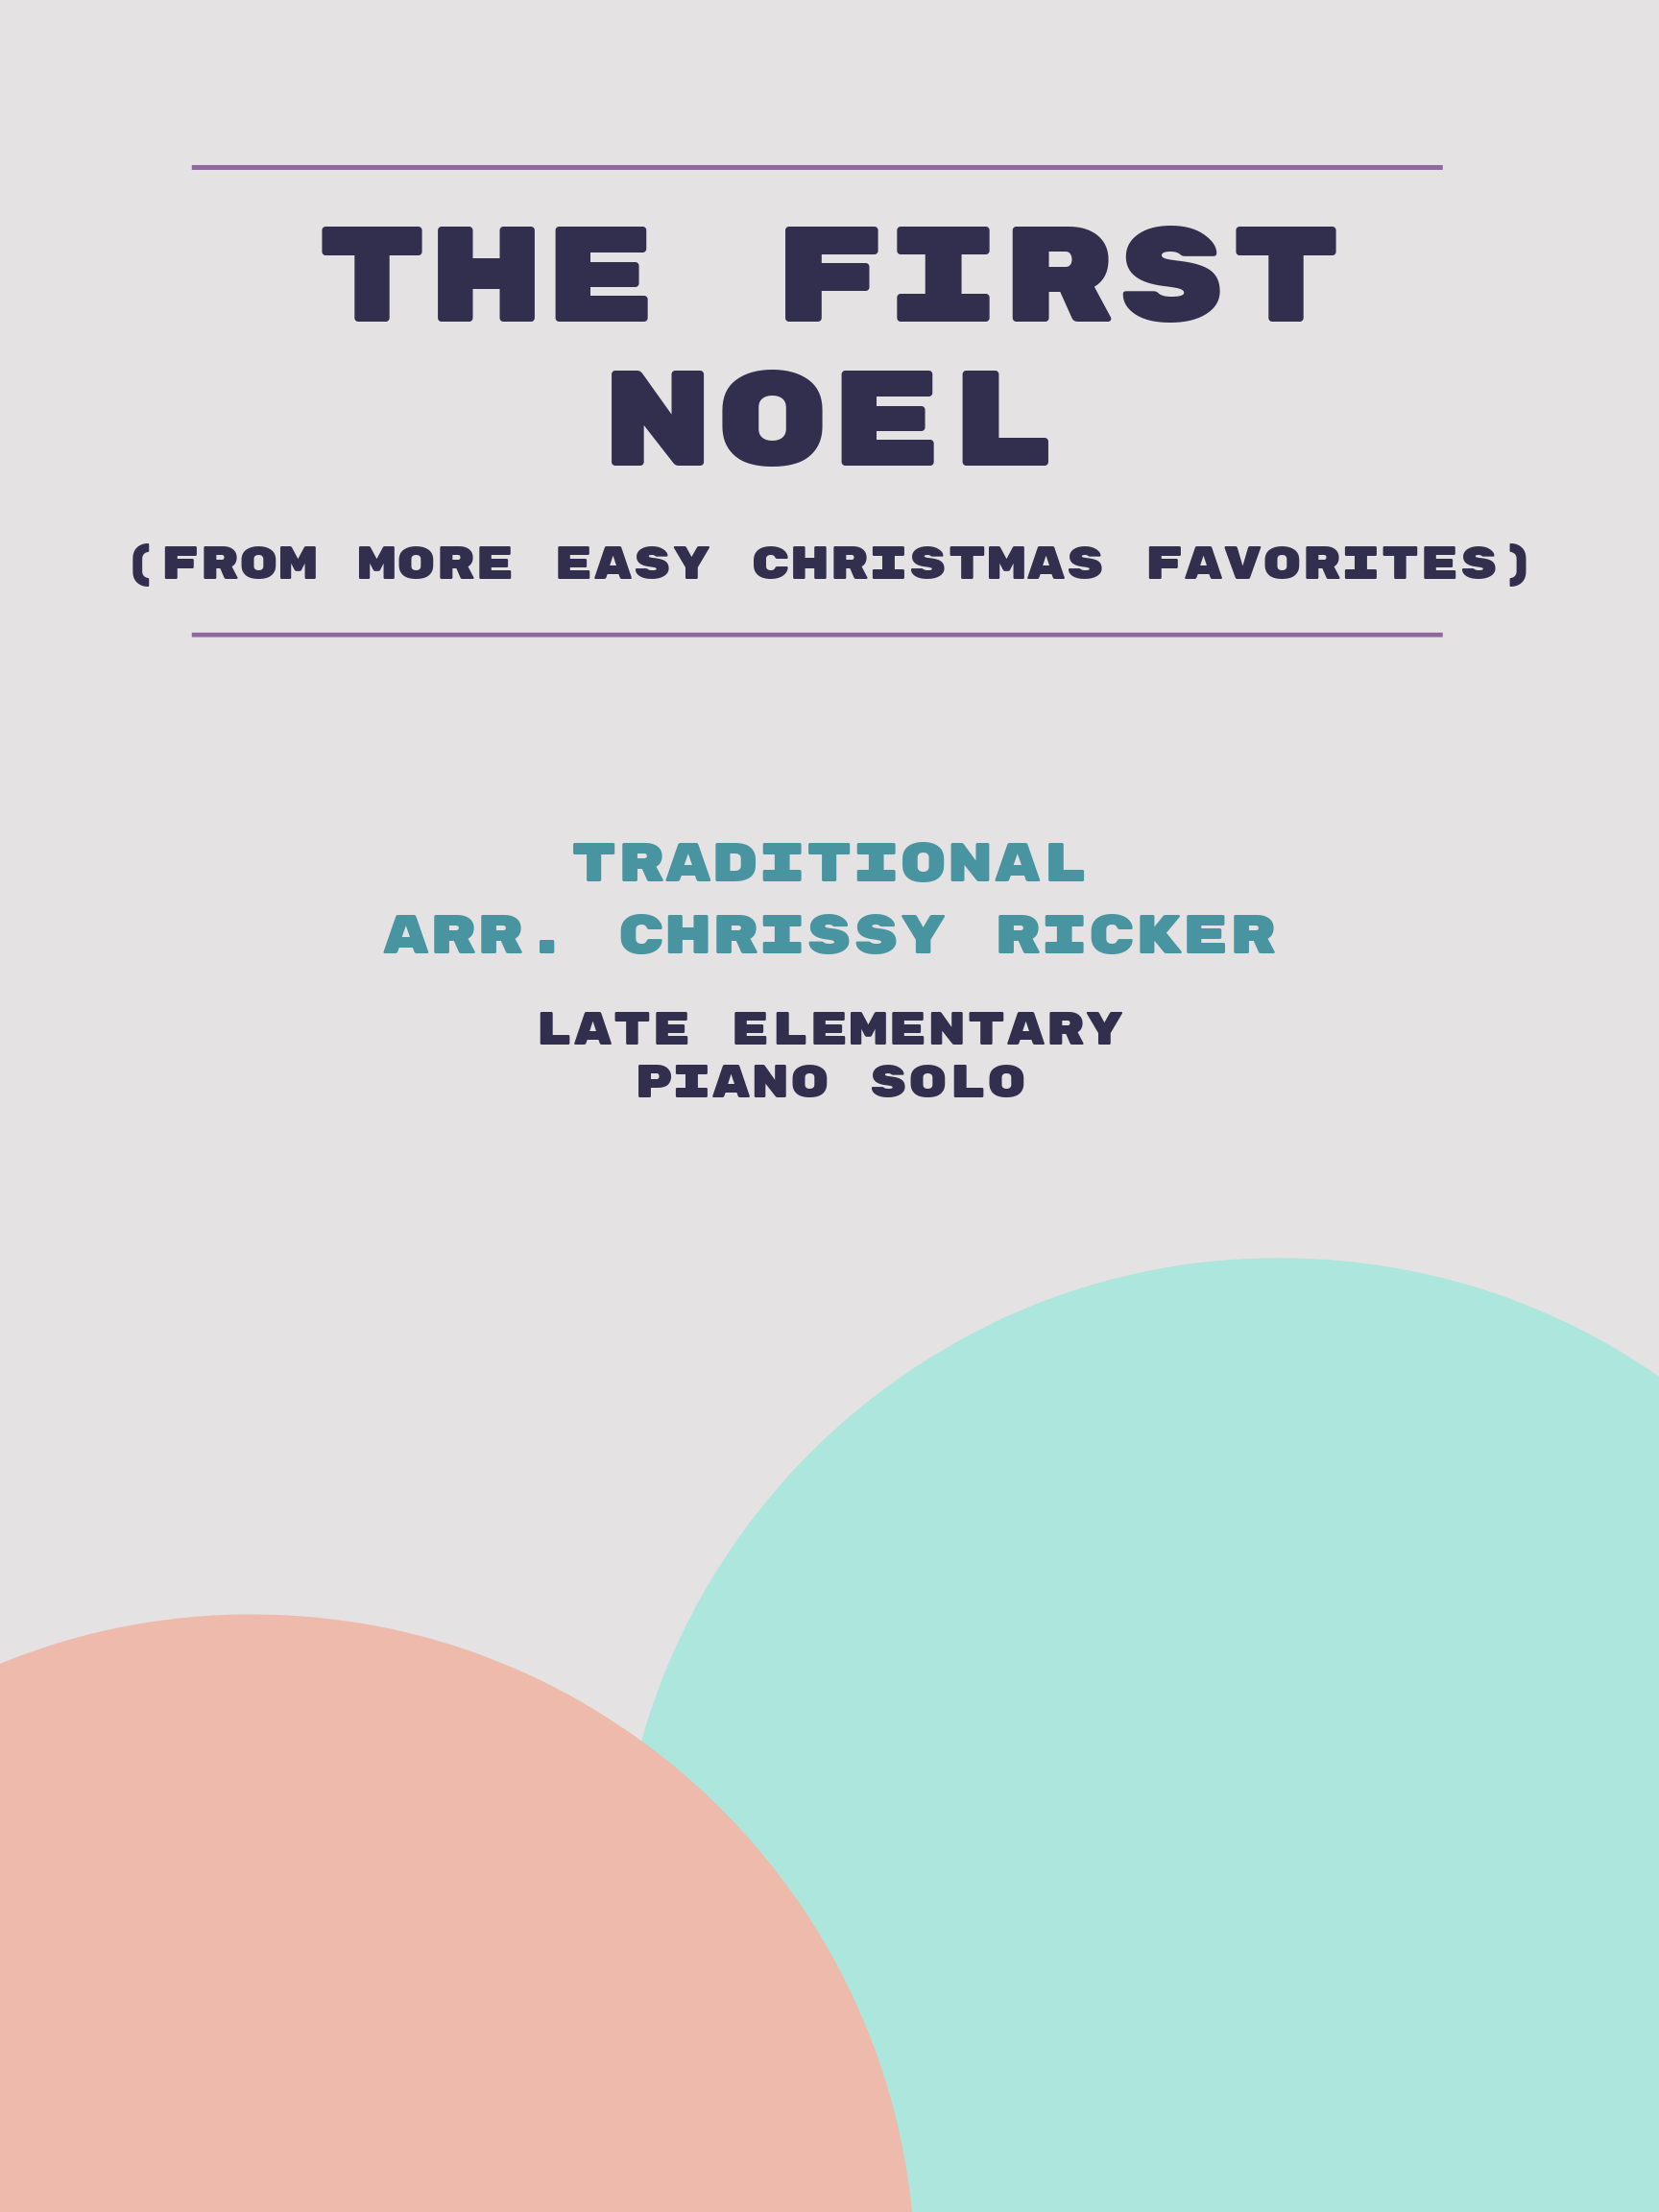 The First Noel by Traditional